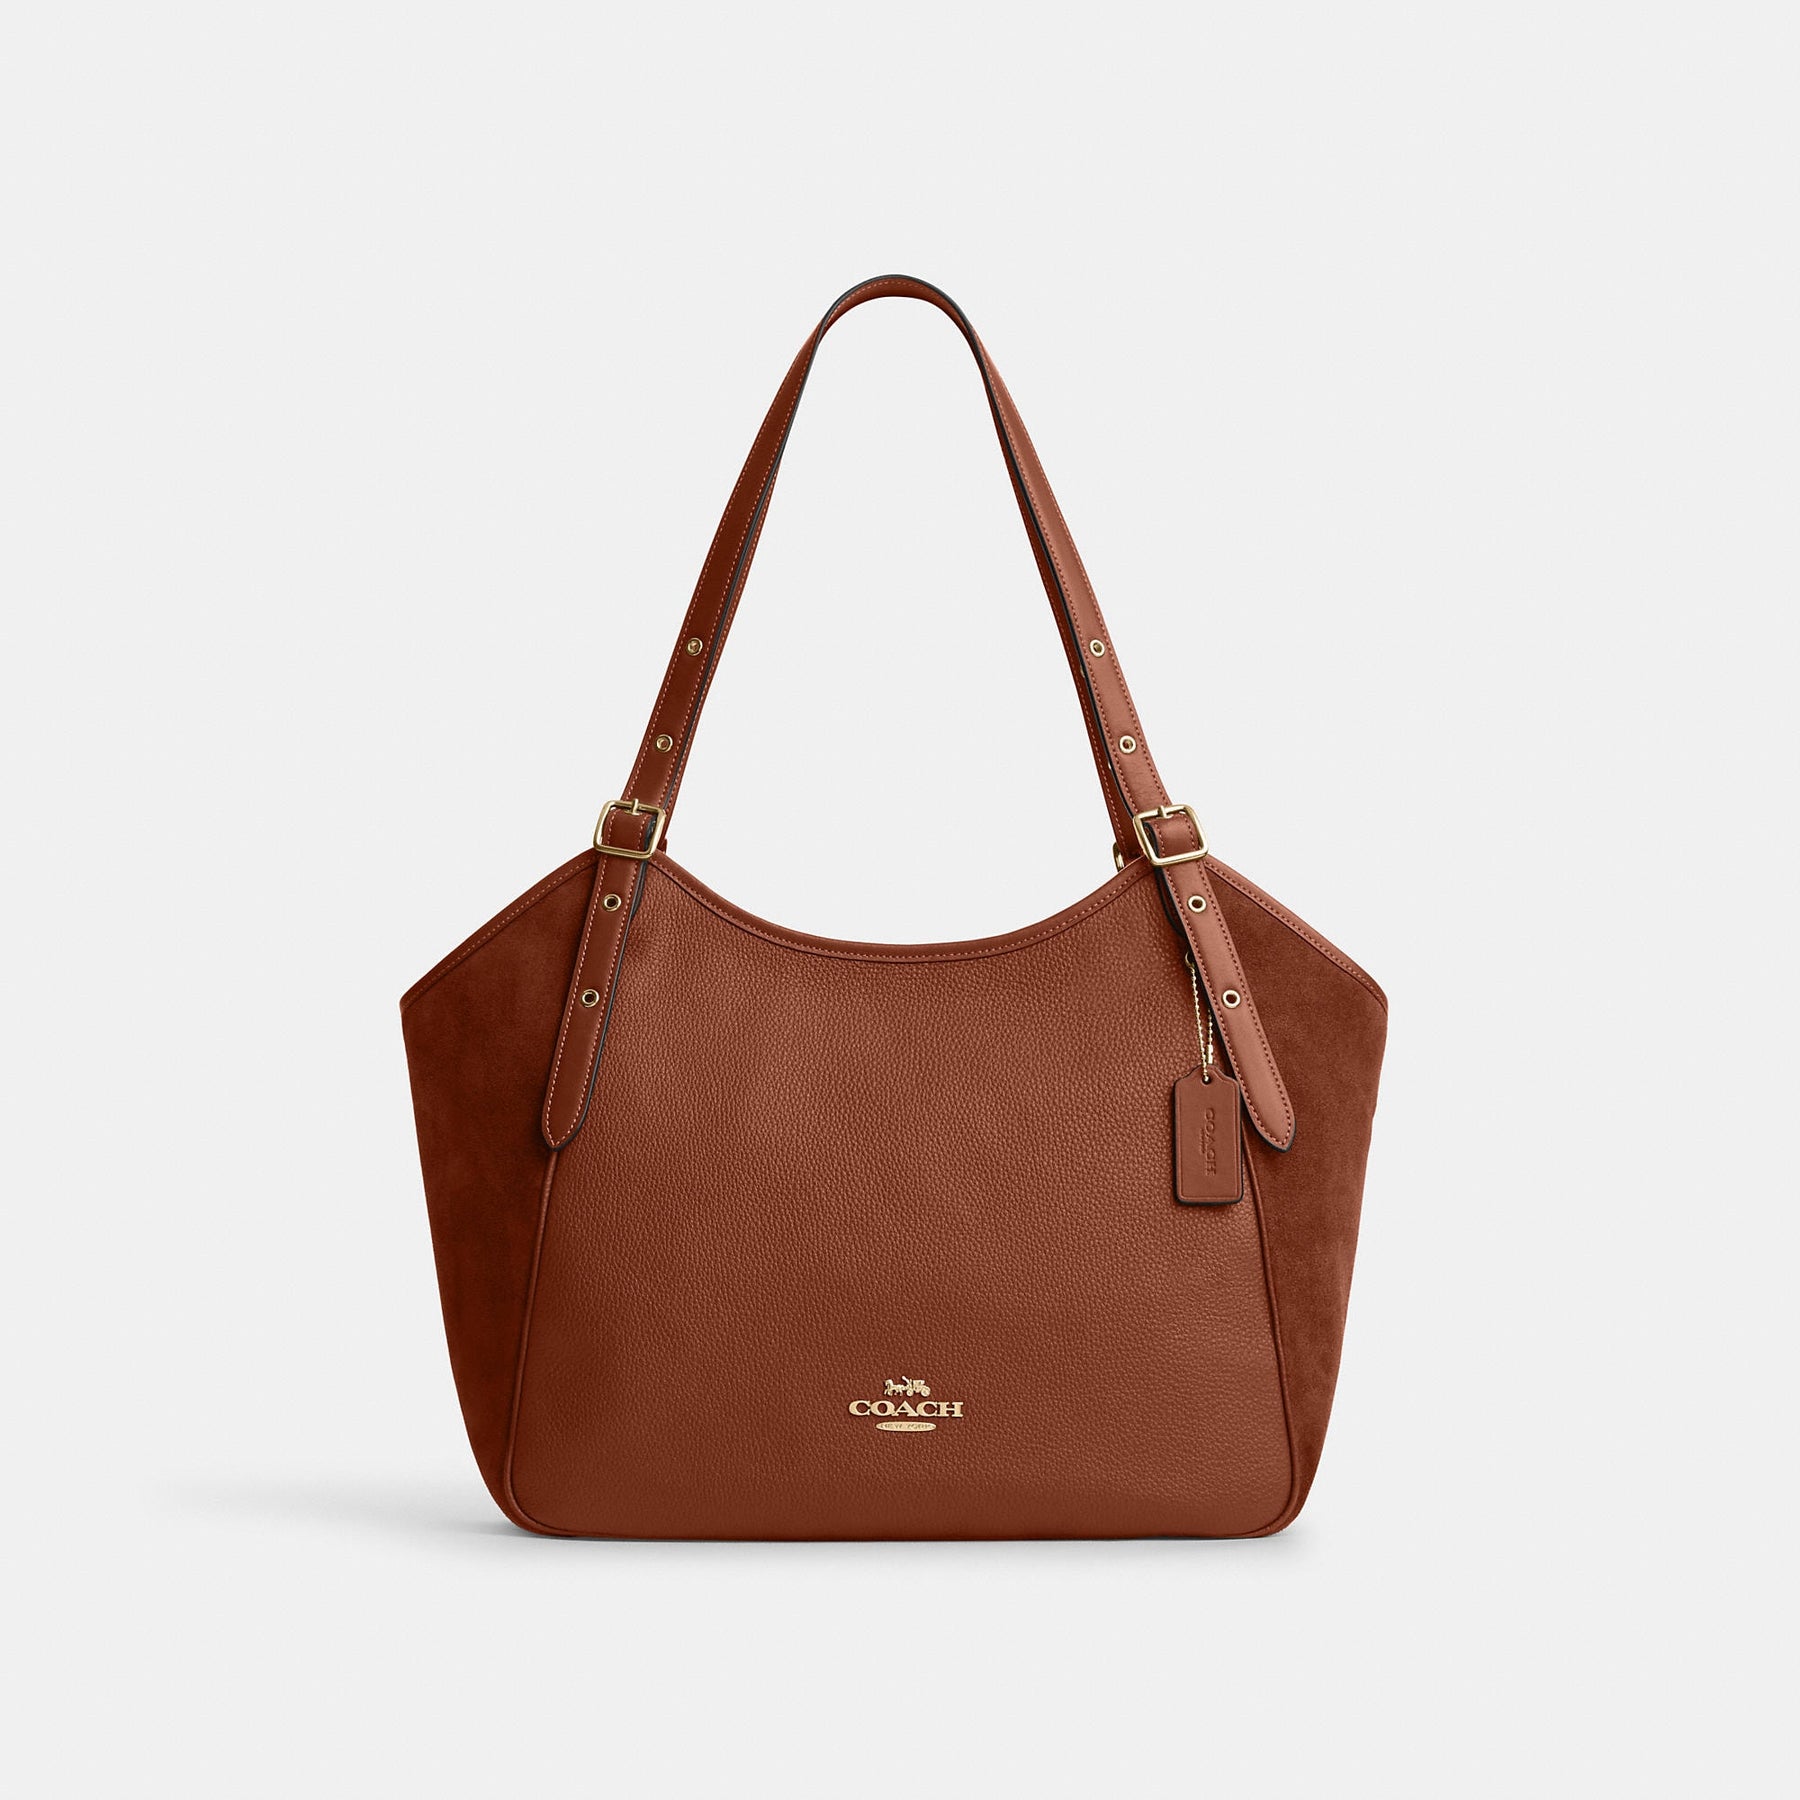 These 13 brown leather bags at Coach Outlet are up to 70% off